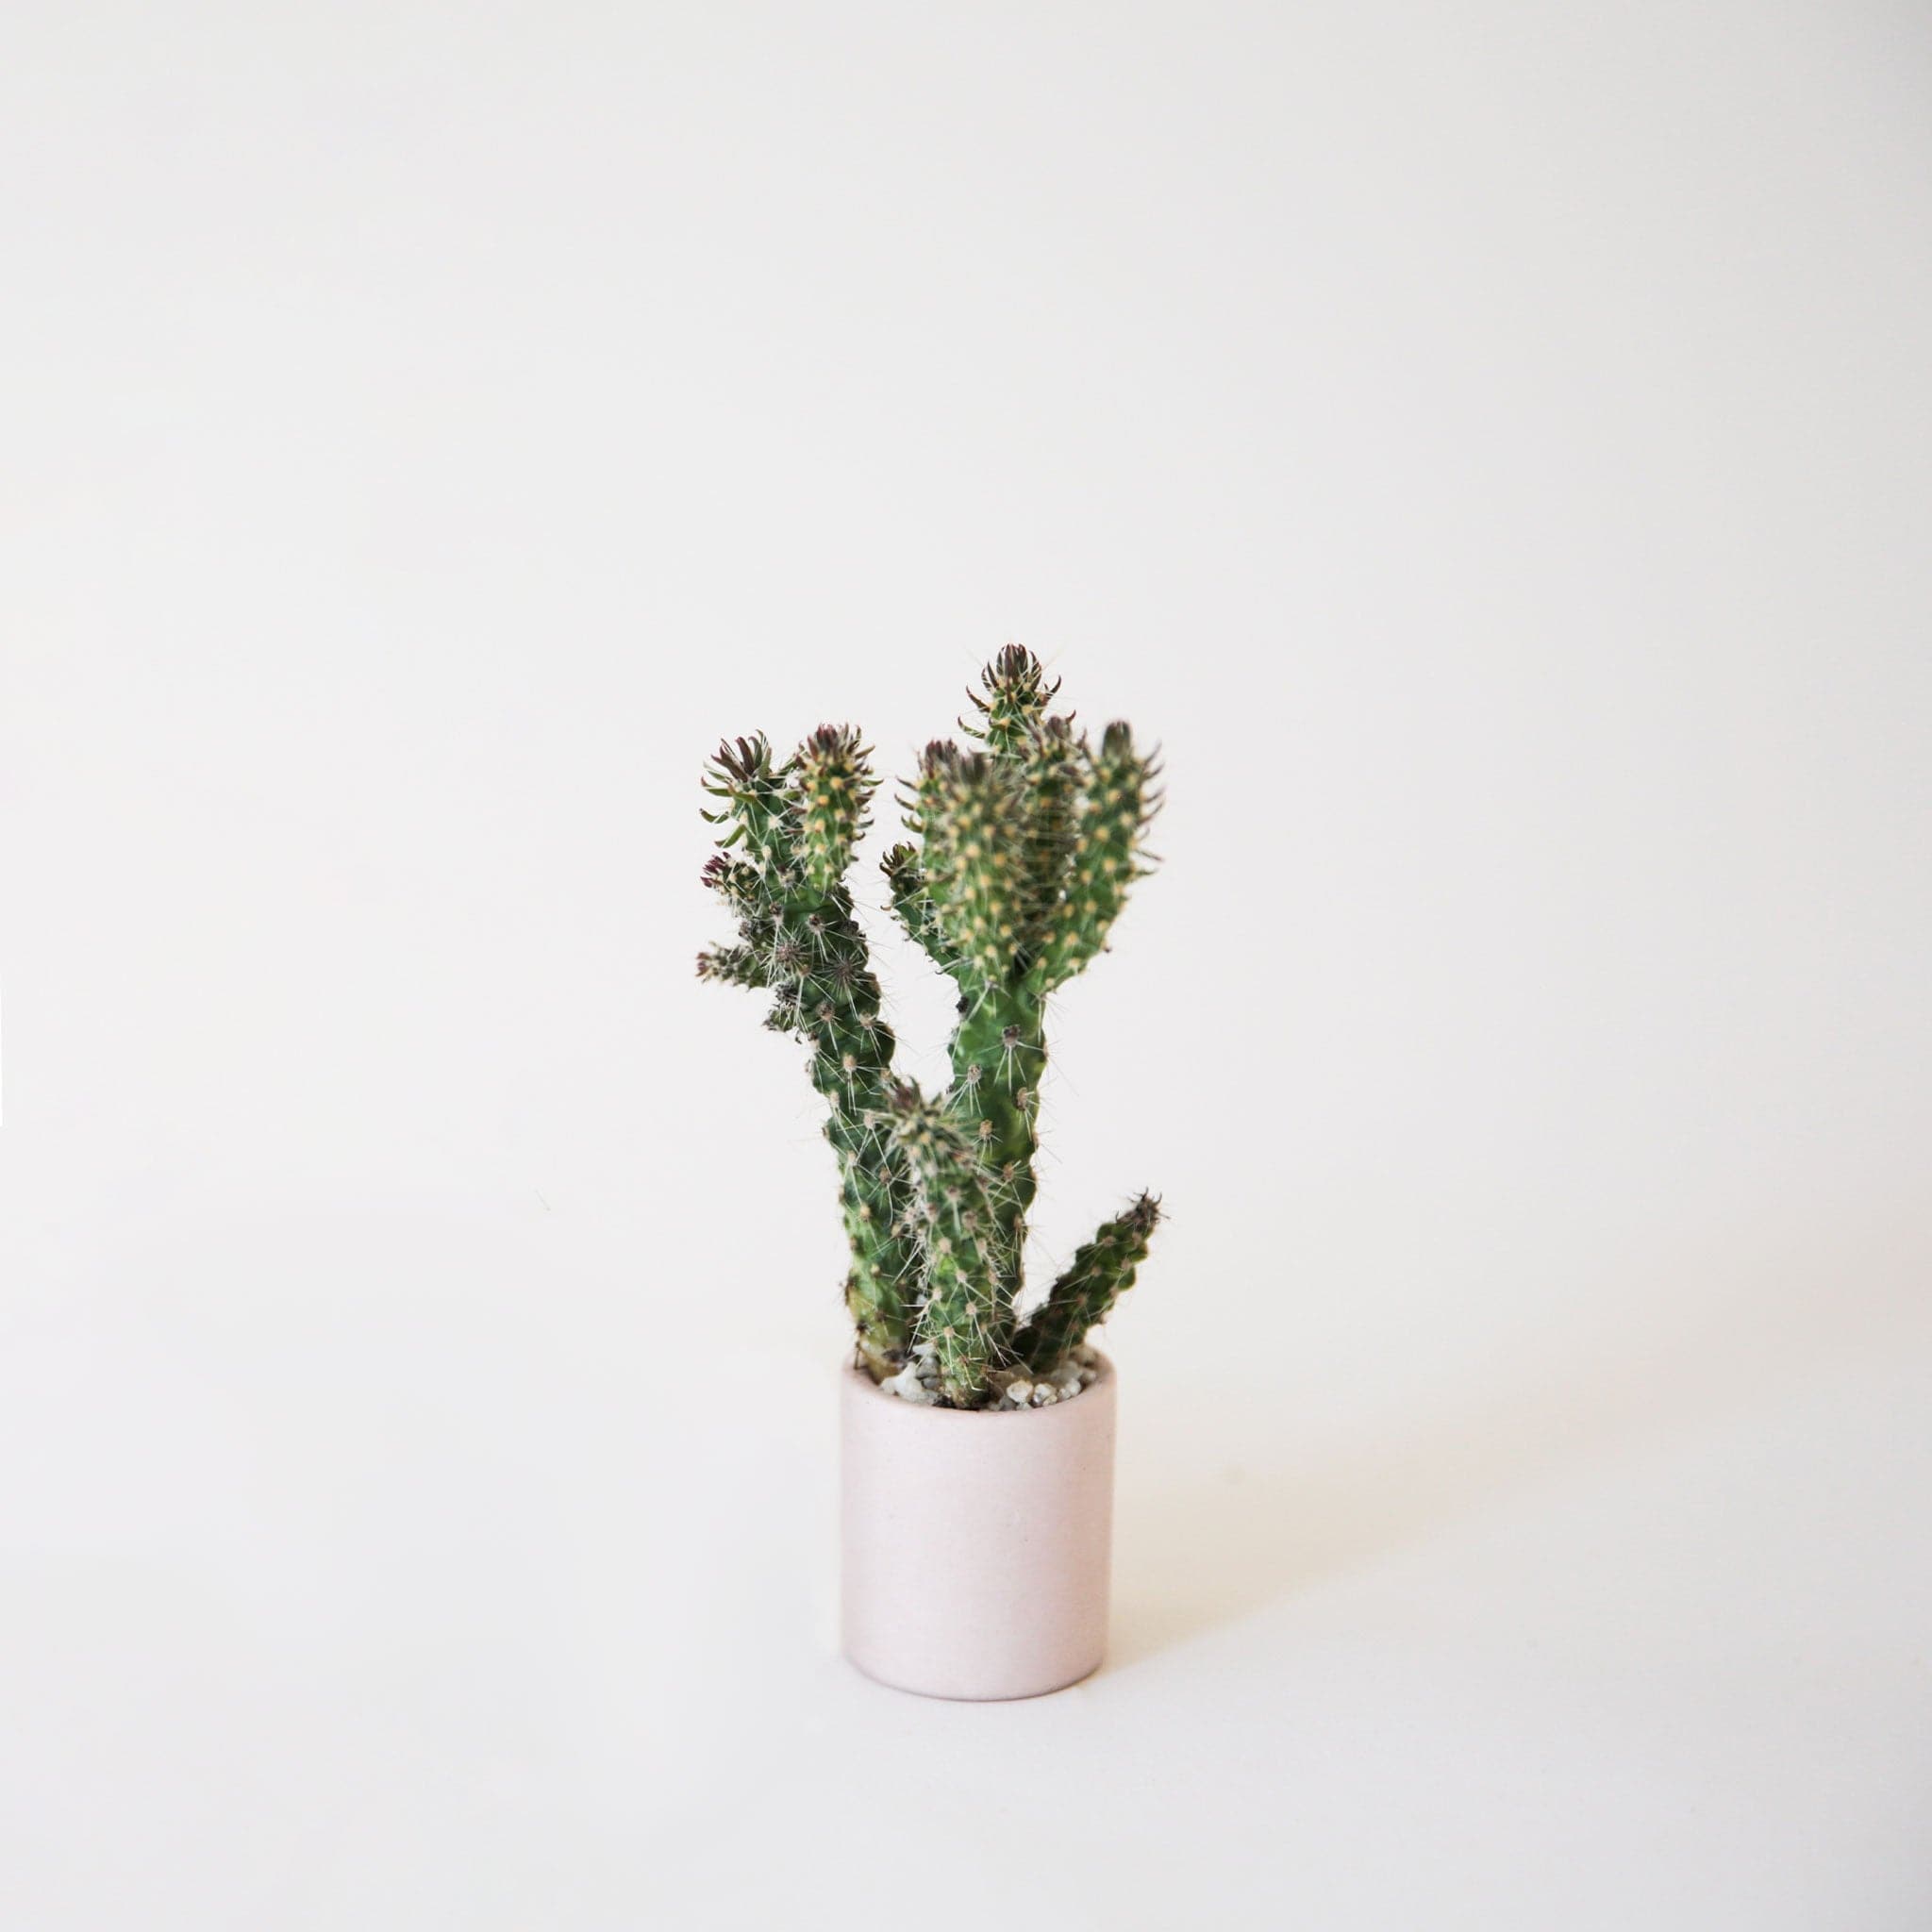 Against a white background is a tiny, round pink pot. Inside the pot is a tiny green cactus.